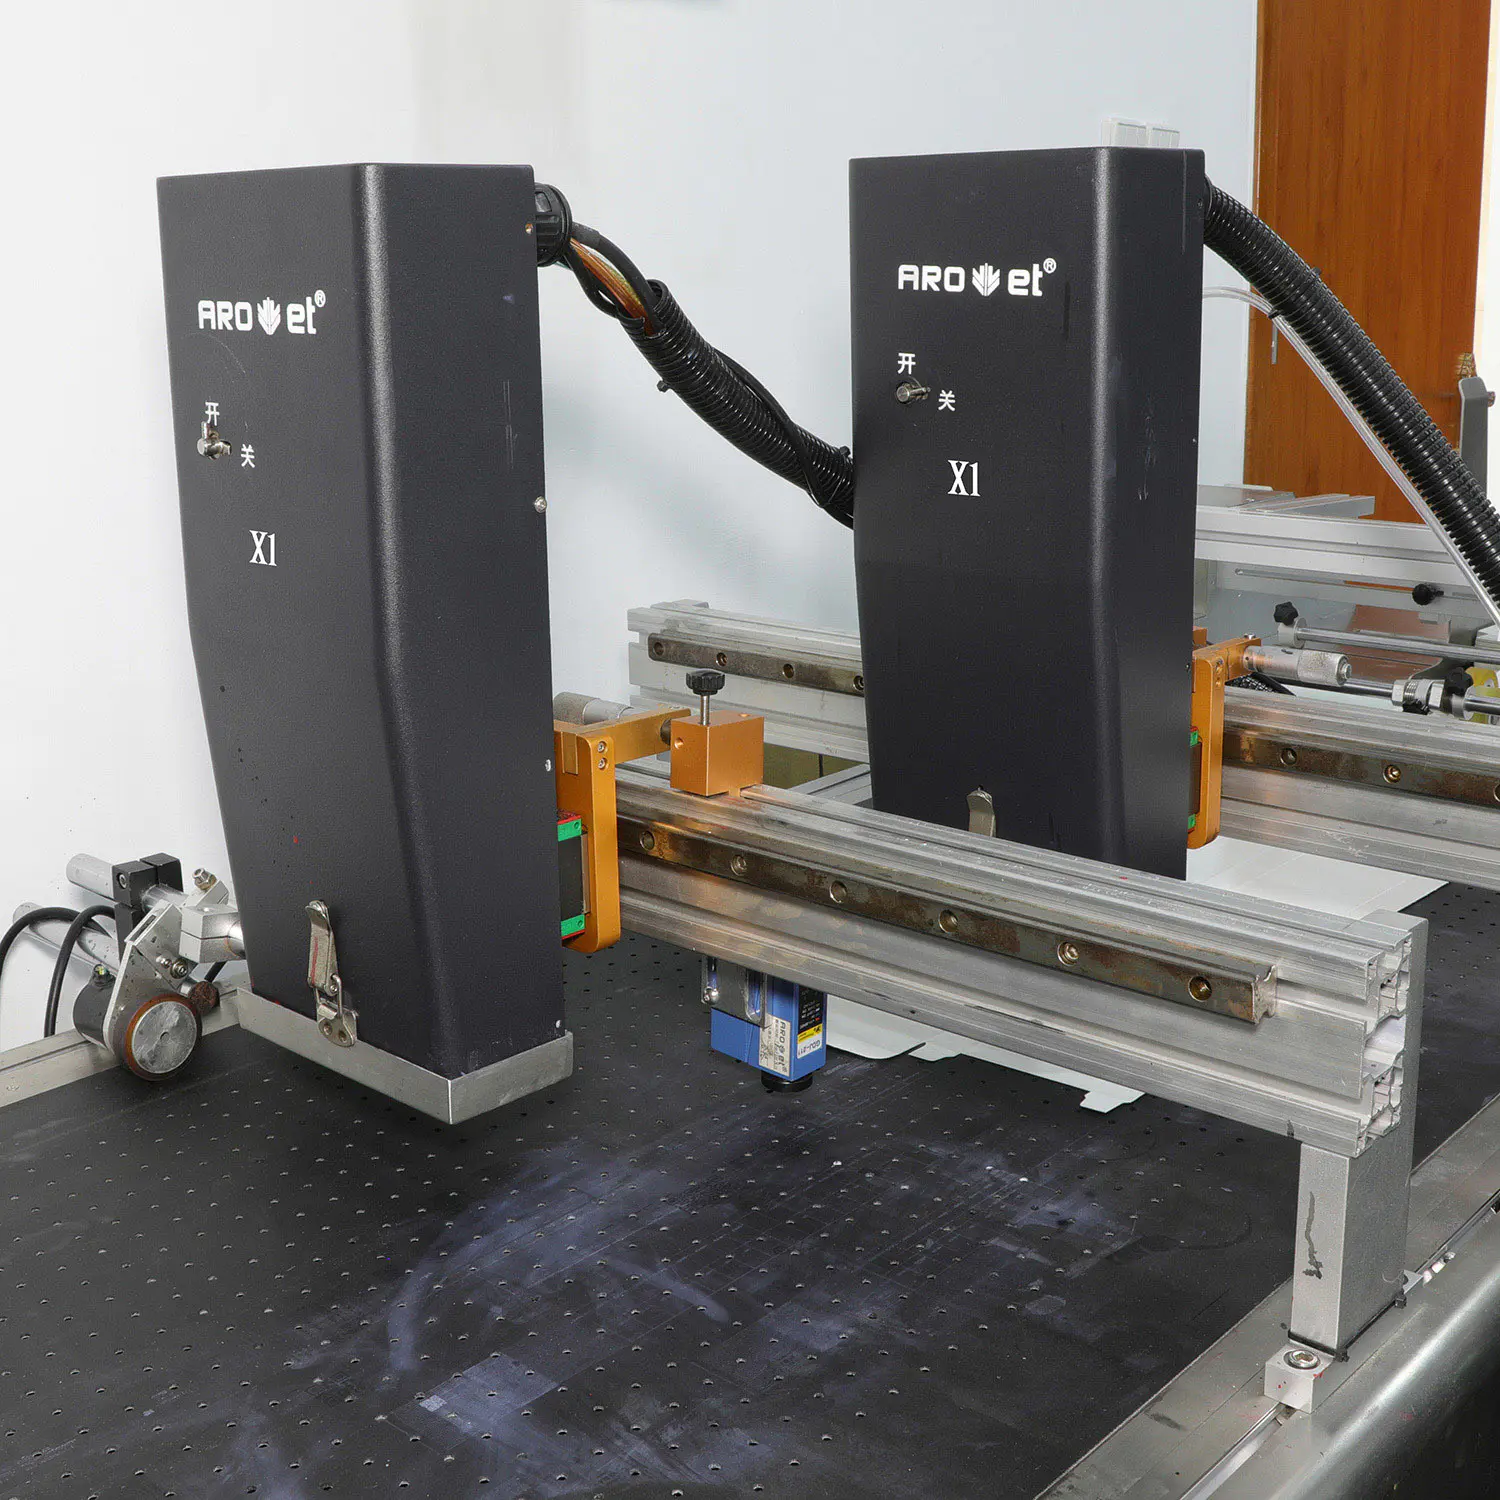 Sheet-Fed Large Format Variable Data Printing System